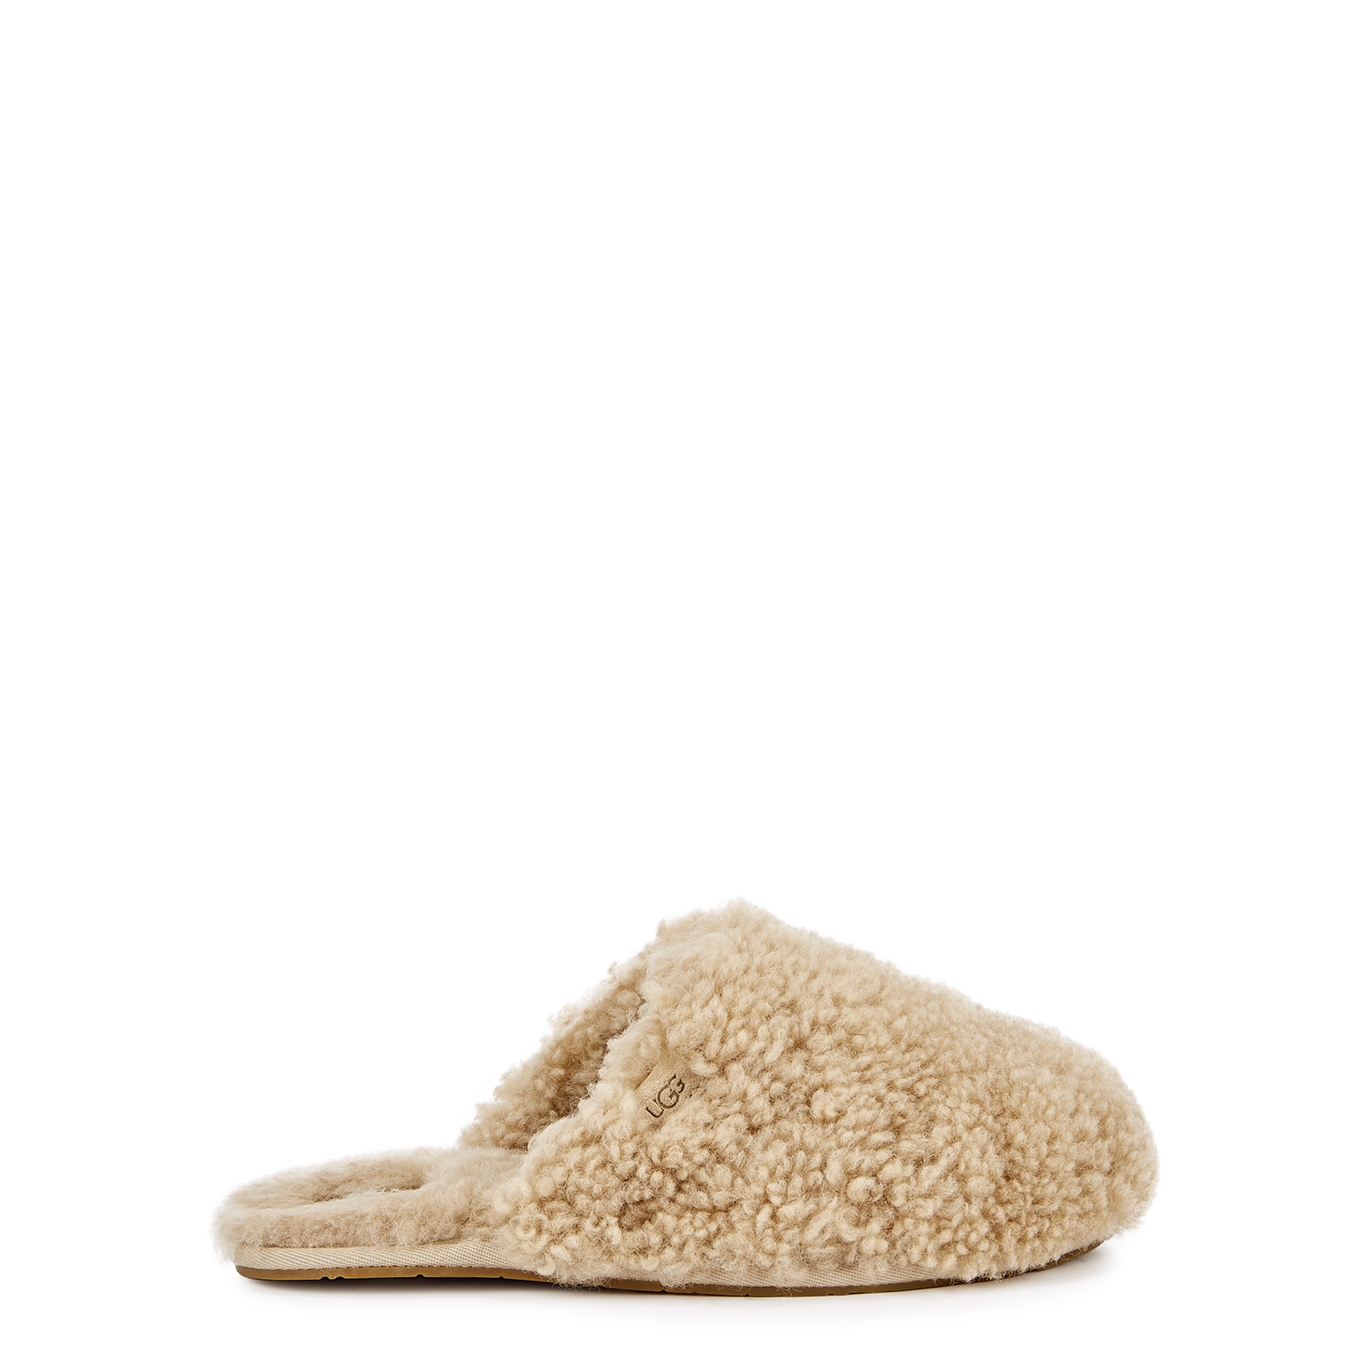 Ugg Maxi Curly Shearling Slippers - Sand - 7